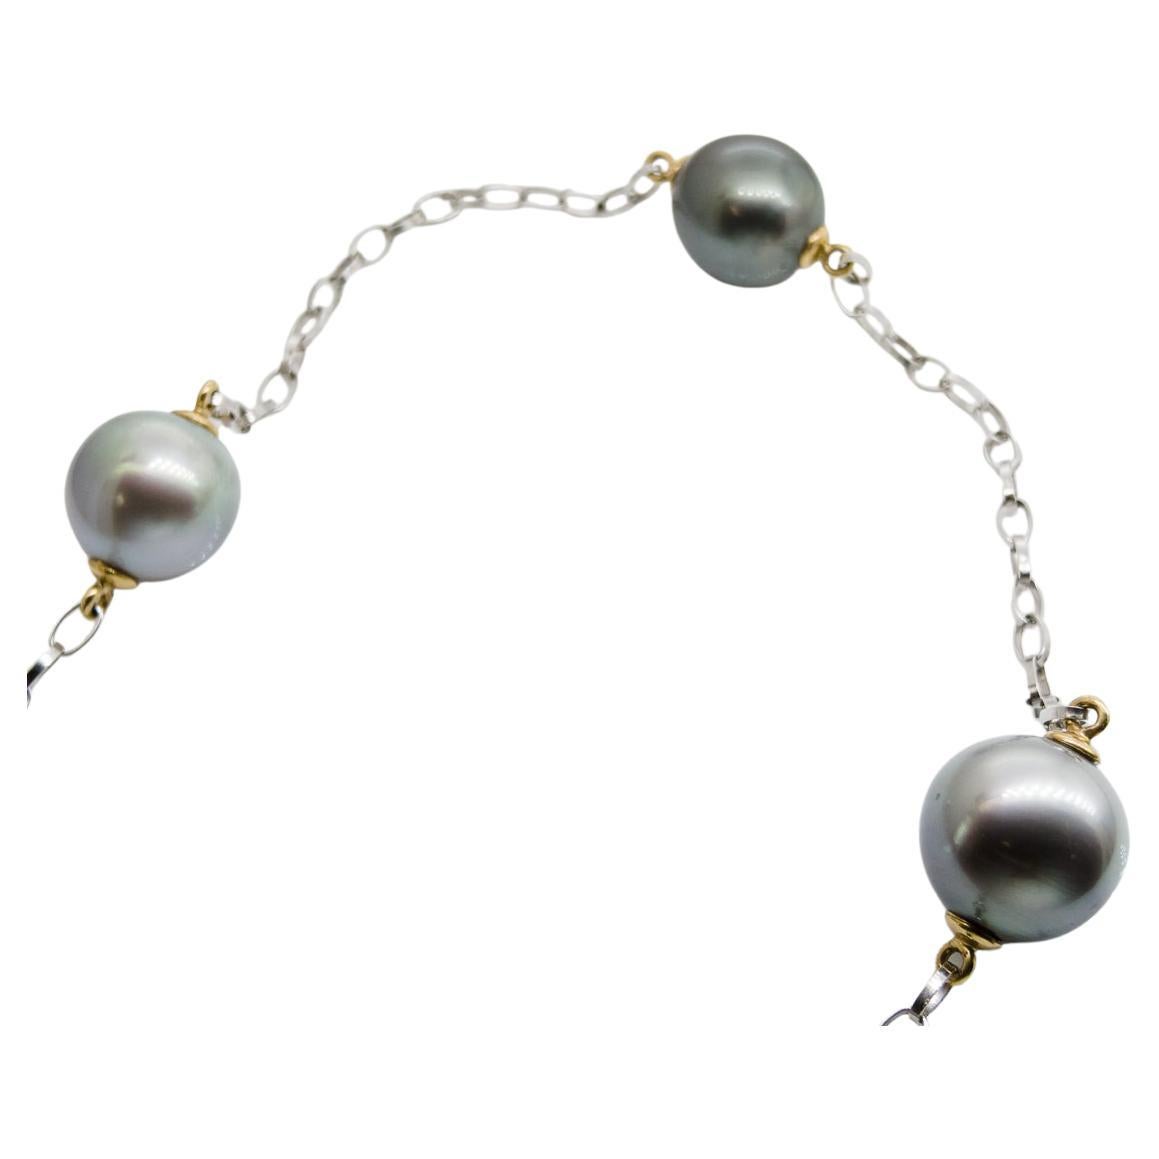 Long (61 cm=24 inch) necklace with 7 beautiful natural Tahitian pearl on 18 carat white gold Belcher chain.
Pearls are capped by 18 carat yellow gold and are ranging from 12mm to 13mm in diameter and from grey to green in colour.
Weight of the